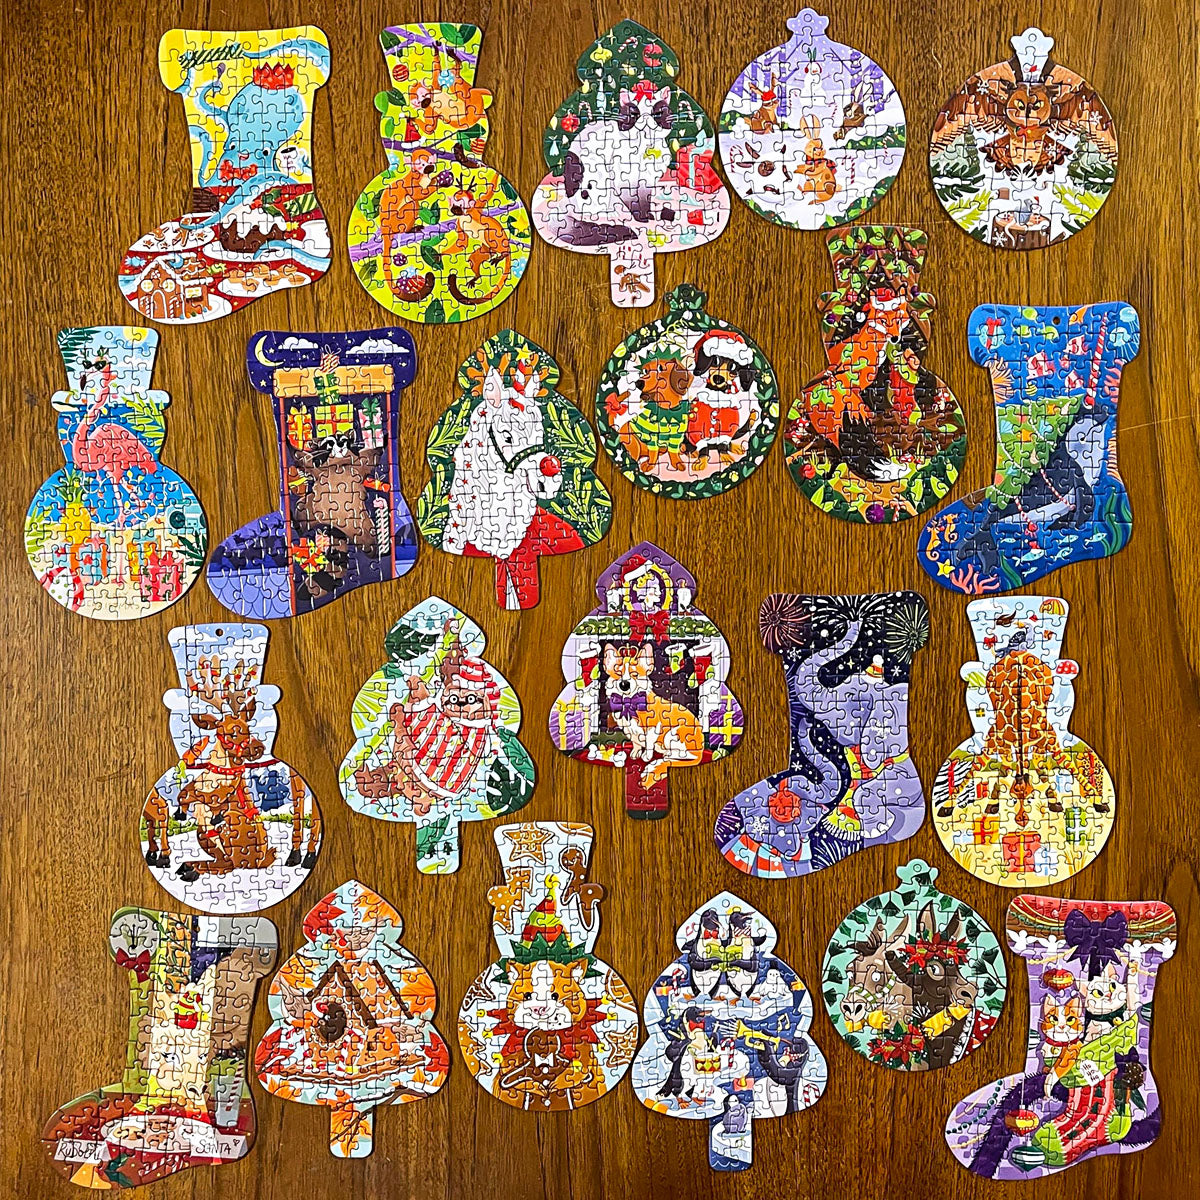 Behind the doors, you’ll find a festive shaped puzzle (snowman, tree, bauble, stocking). Each design features a mischievous animal getting in the Christmas spirit. And behind two doors are puzzle glue and ribbon, so you can craft your own decorations.